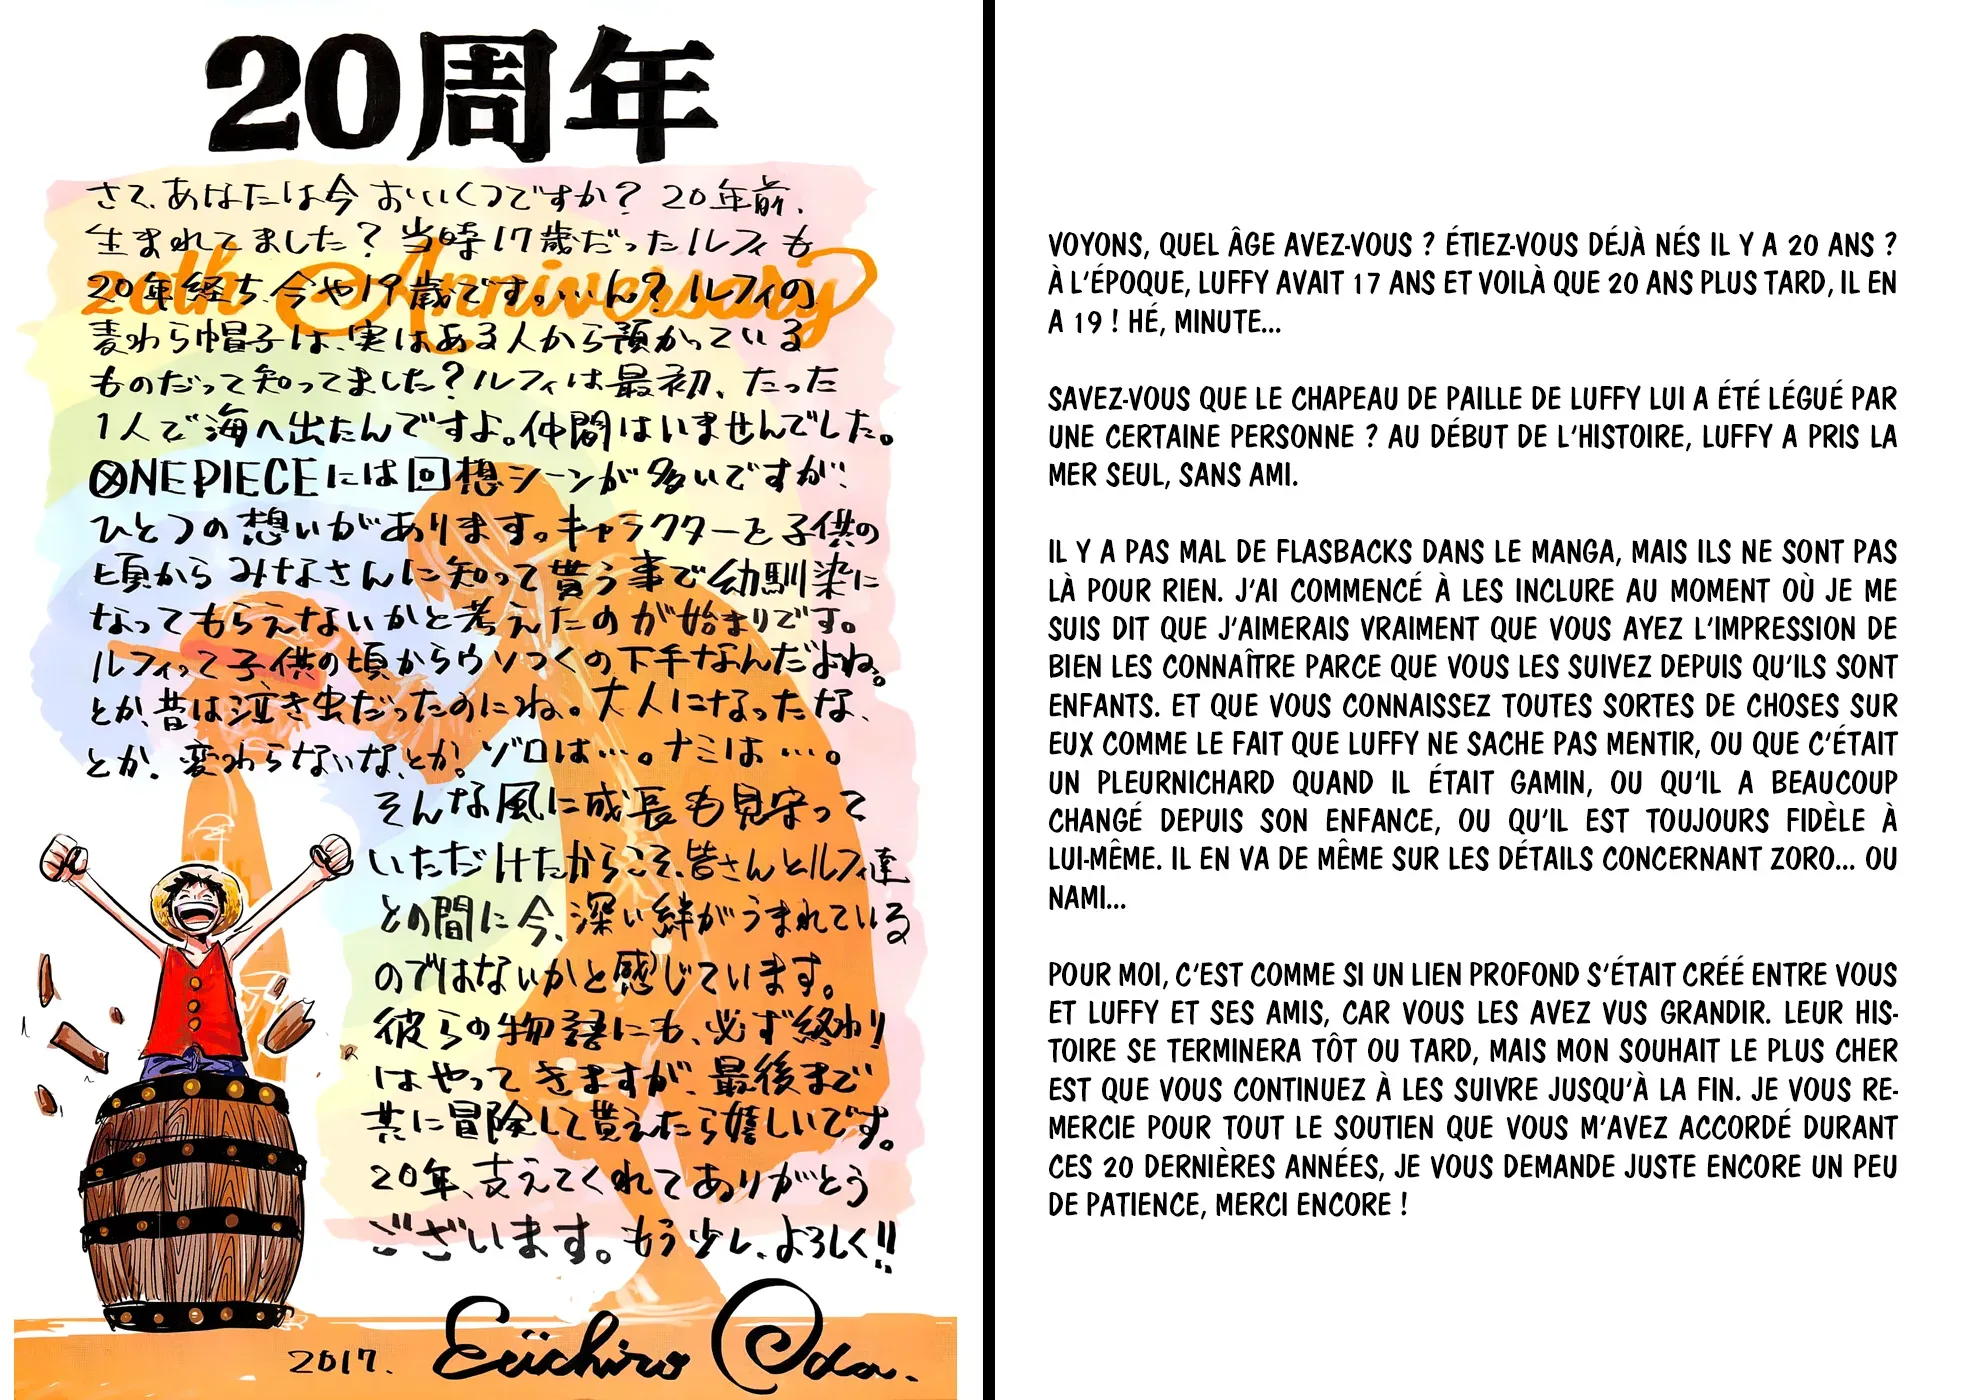 One Piece: Chapter chapitre-872 - Page 1